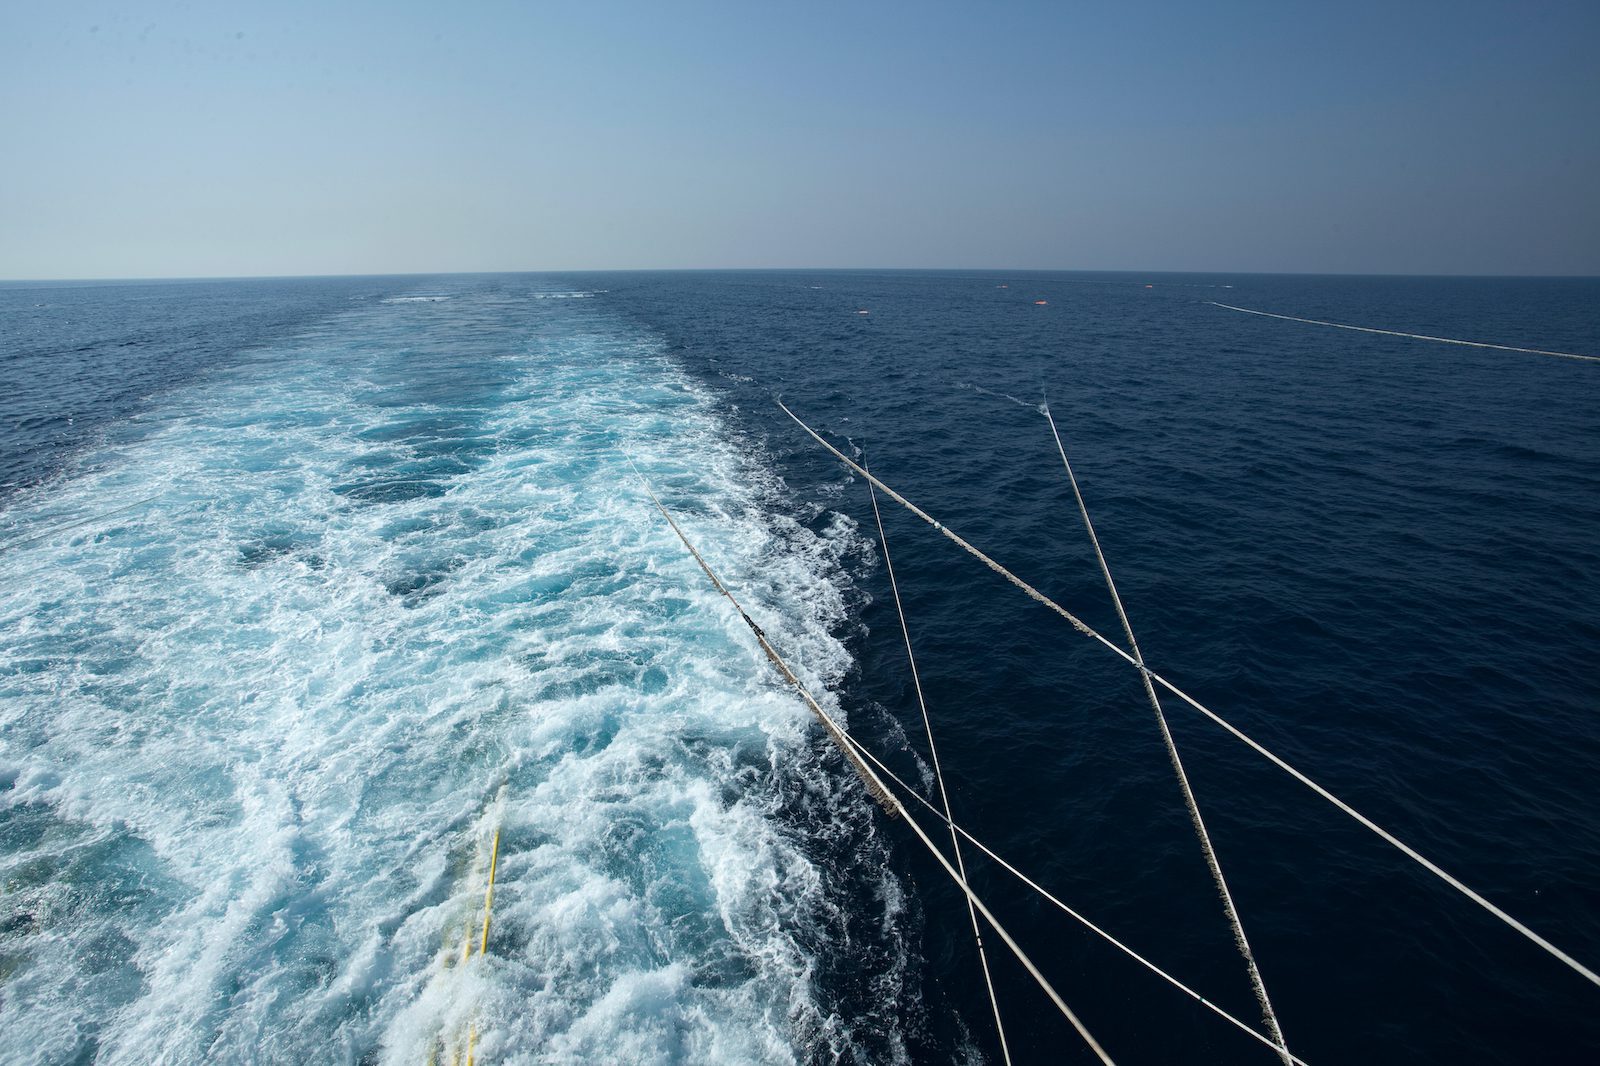 Offshore,Seismic,Research,Vessel,Guns,And,Cables. Photo: cacar/Shutterstock